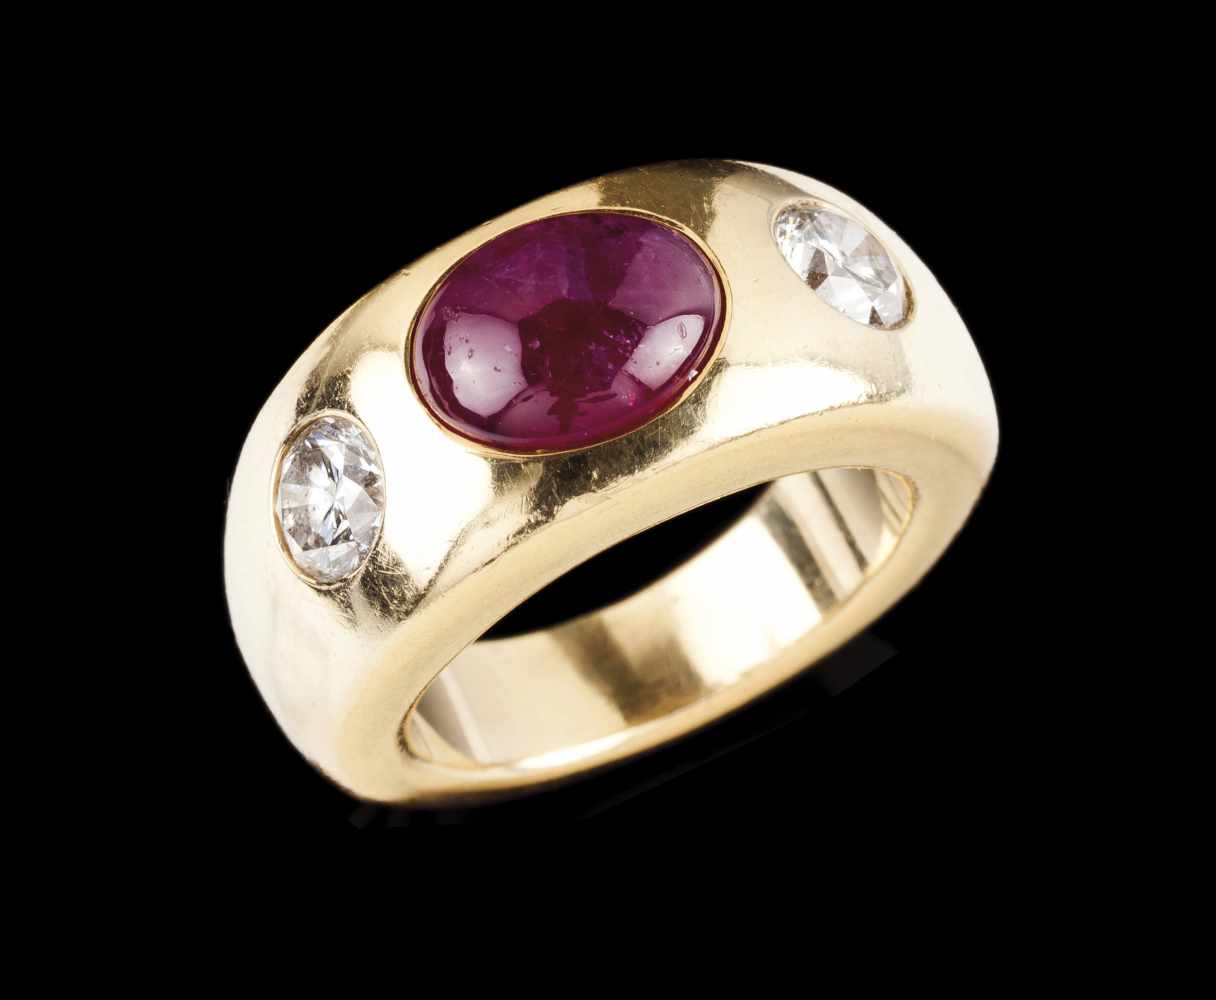 A ringYellow gold, set with cabochon root ruby (9x7mm) and 2 round brilliant cut diamonds (ca.1.